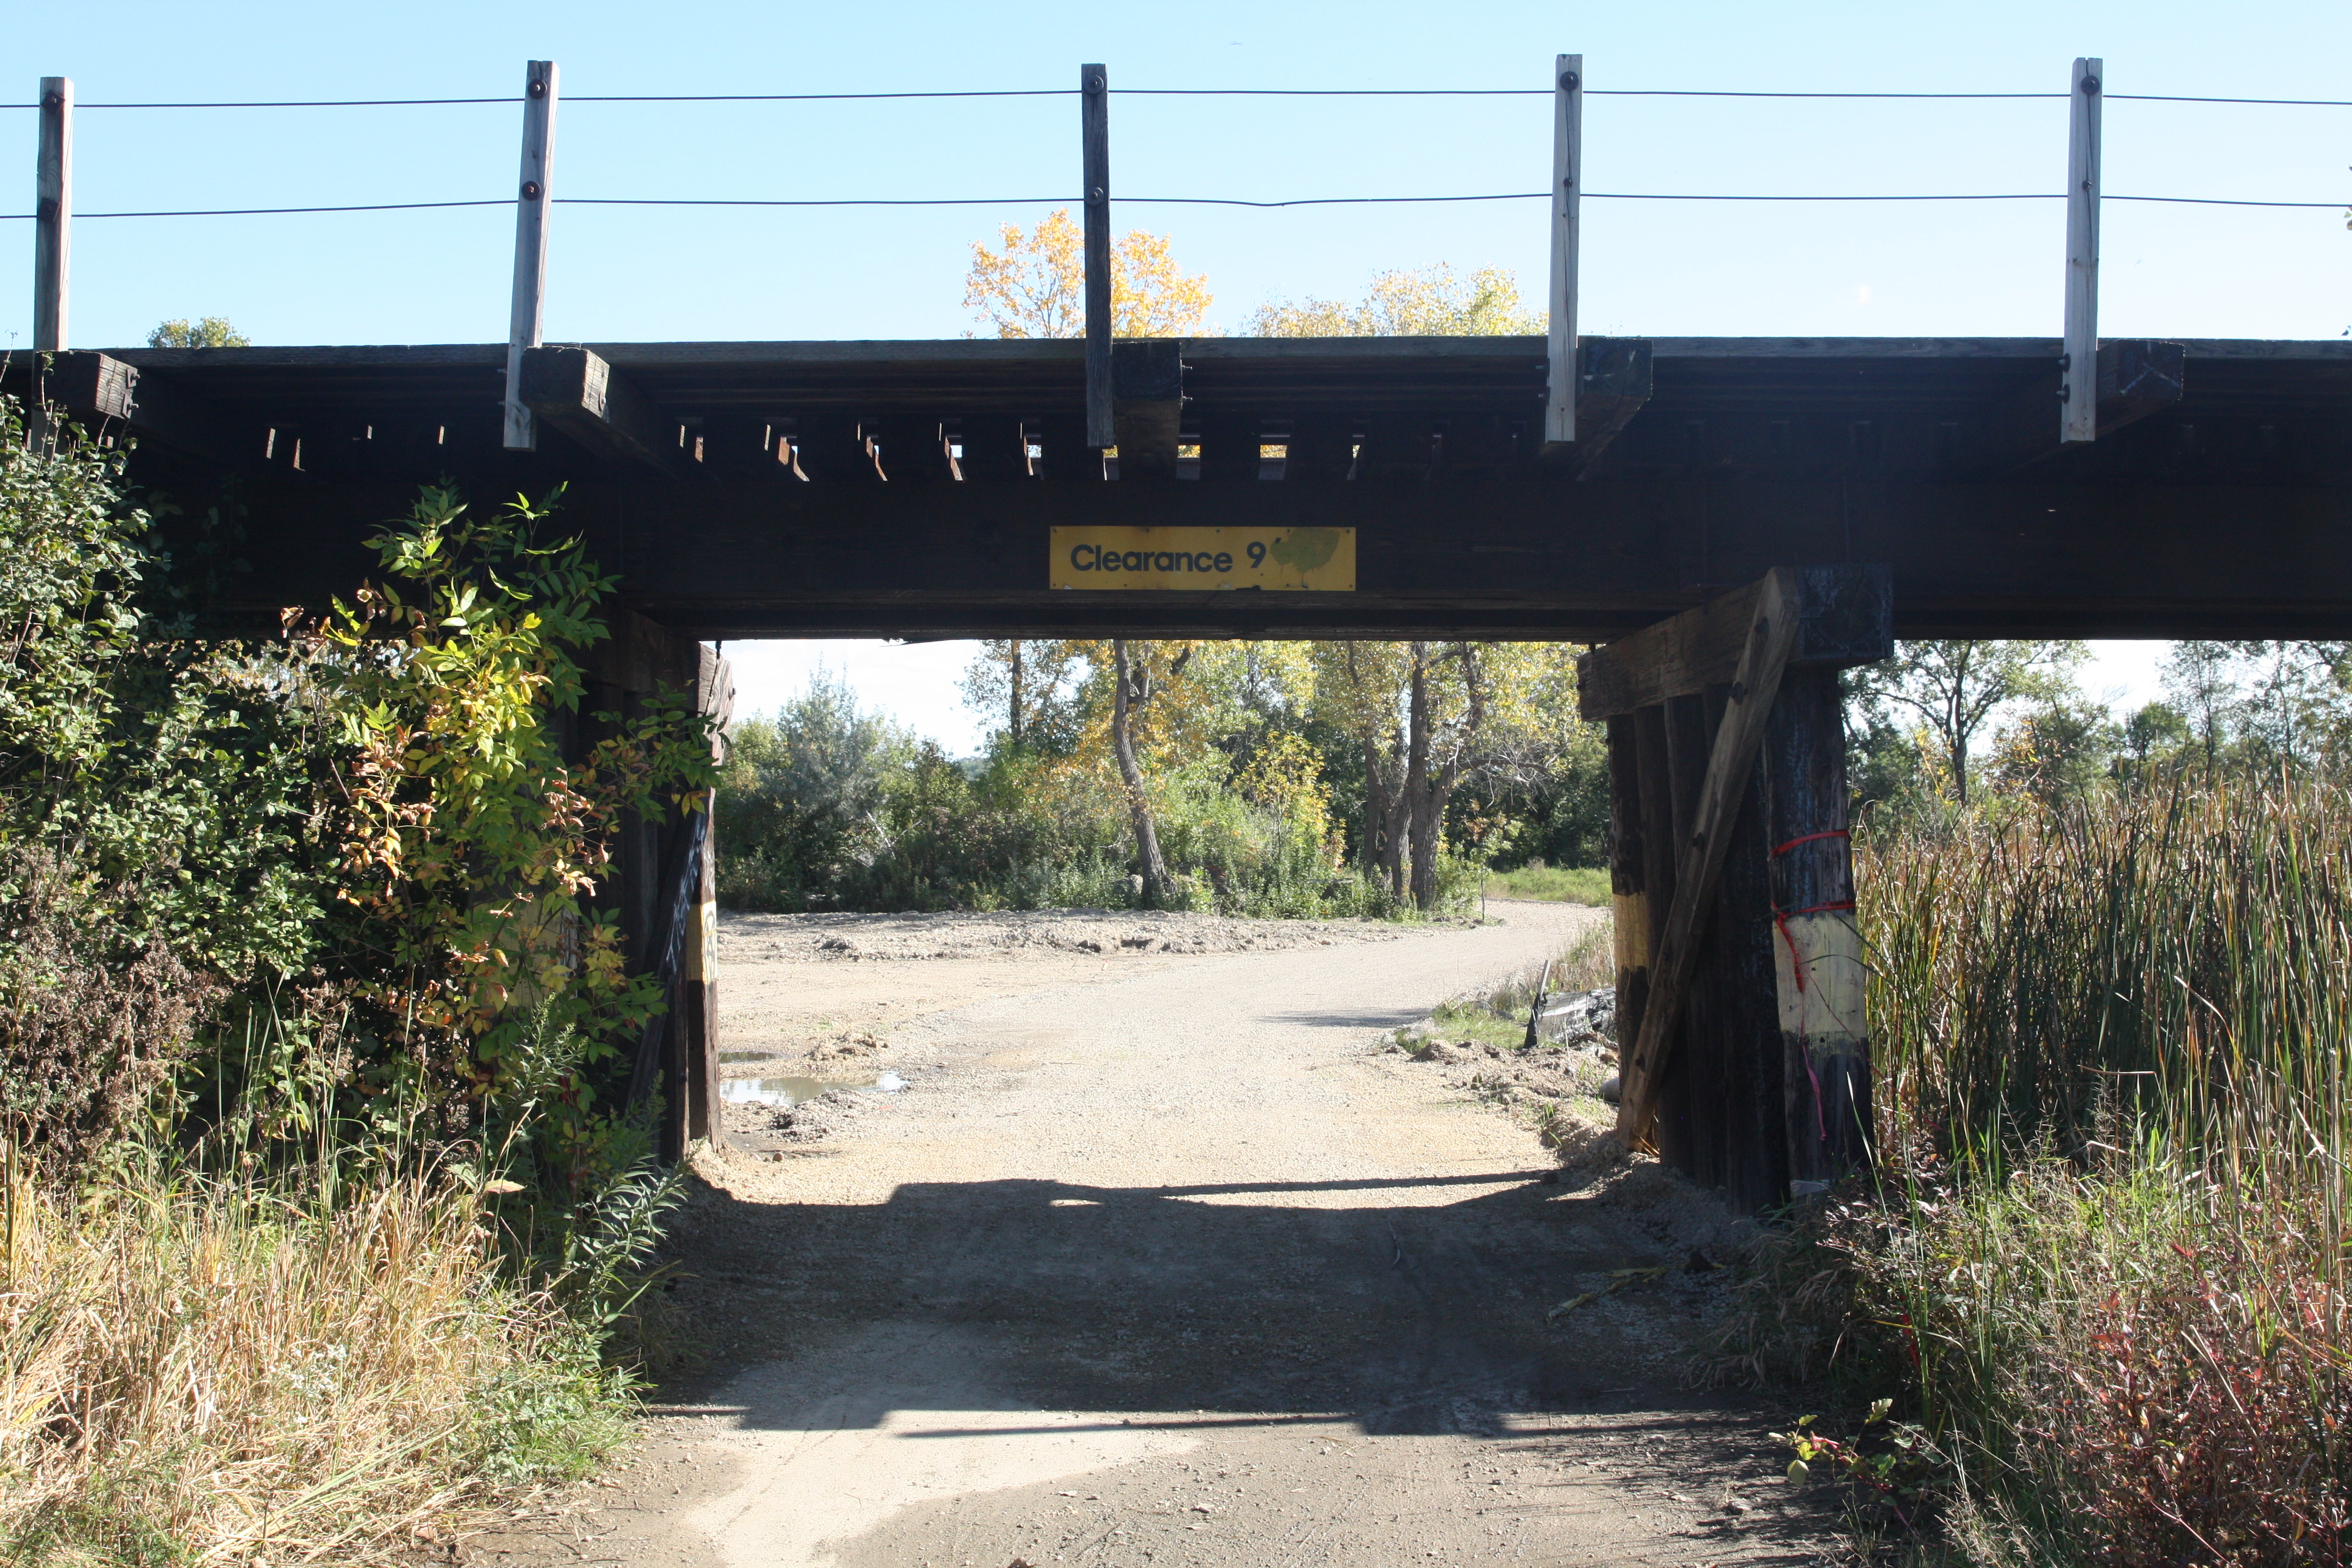 The railroad bridge over one of the paths through park.